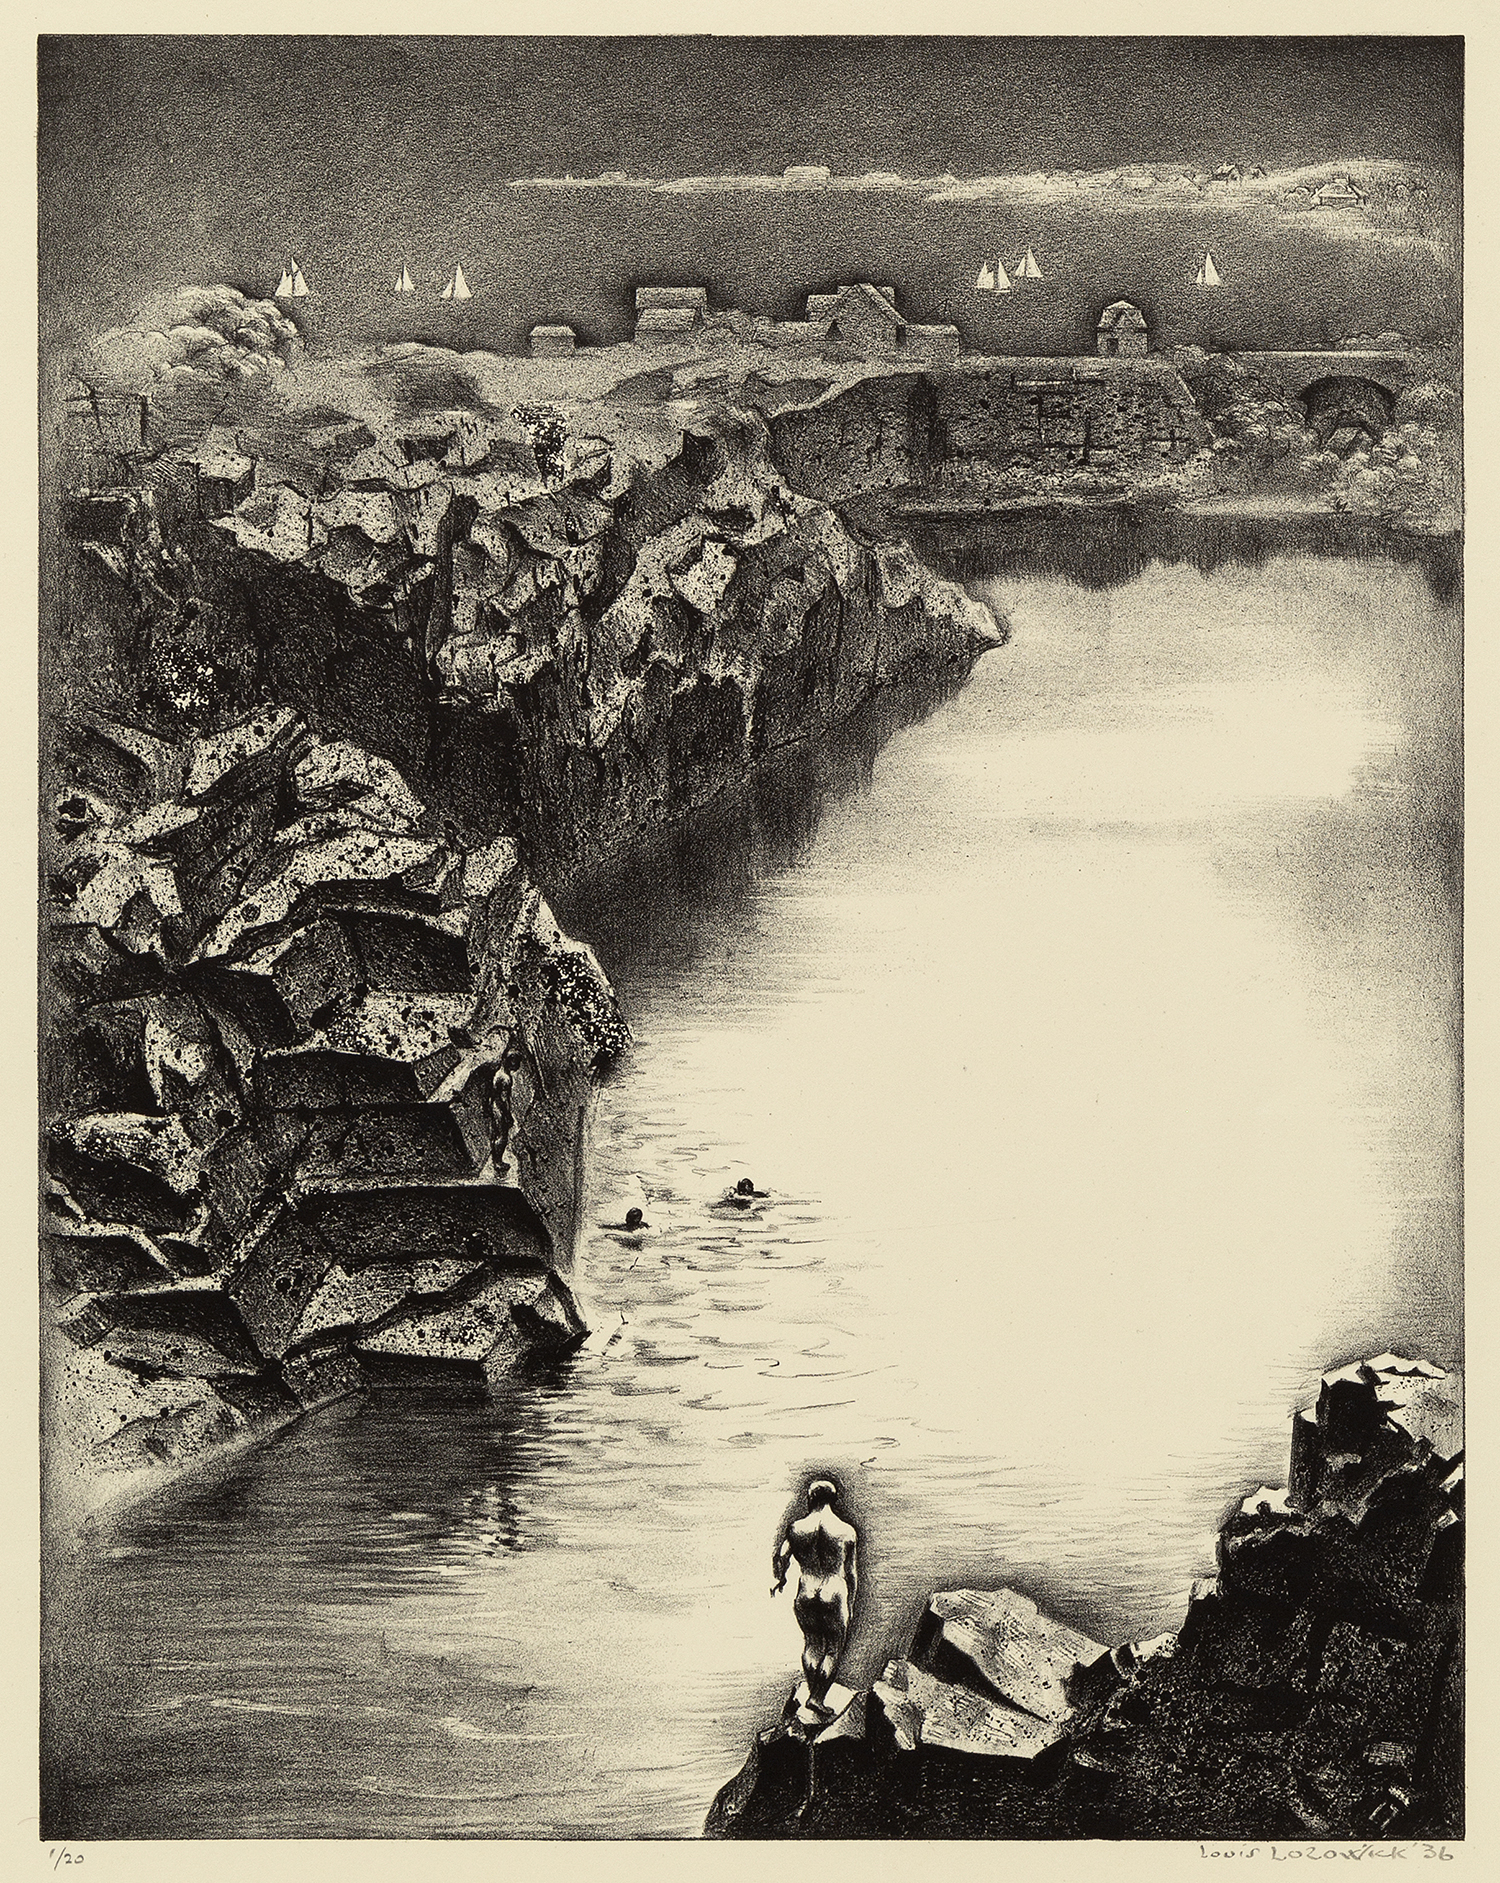 Abandoned Quarry (Rockport Quarries), 1936, Lithograph, 14 x 11 inches (35.6 x 27.9 cm), Edition of 20